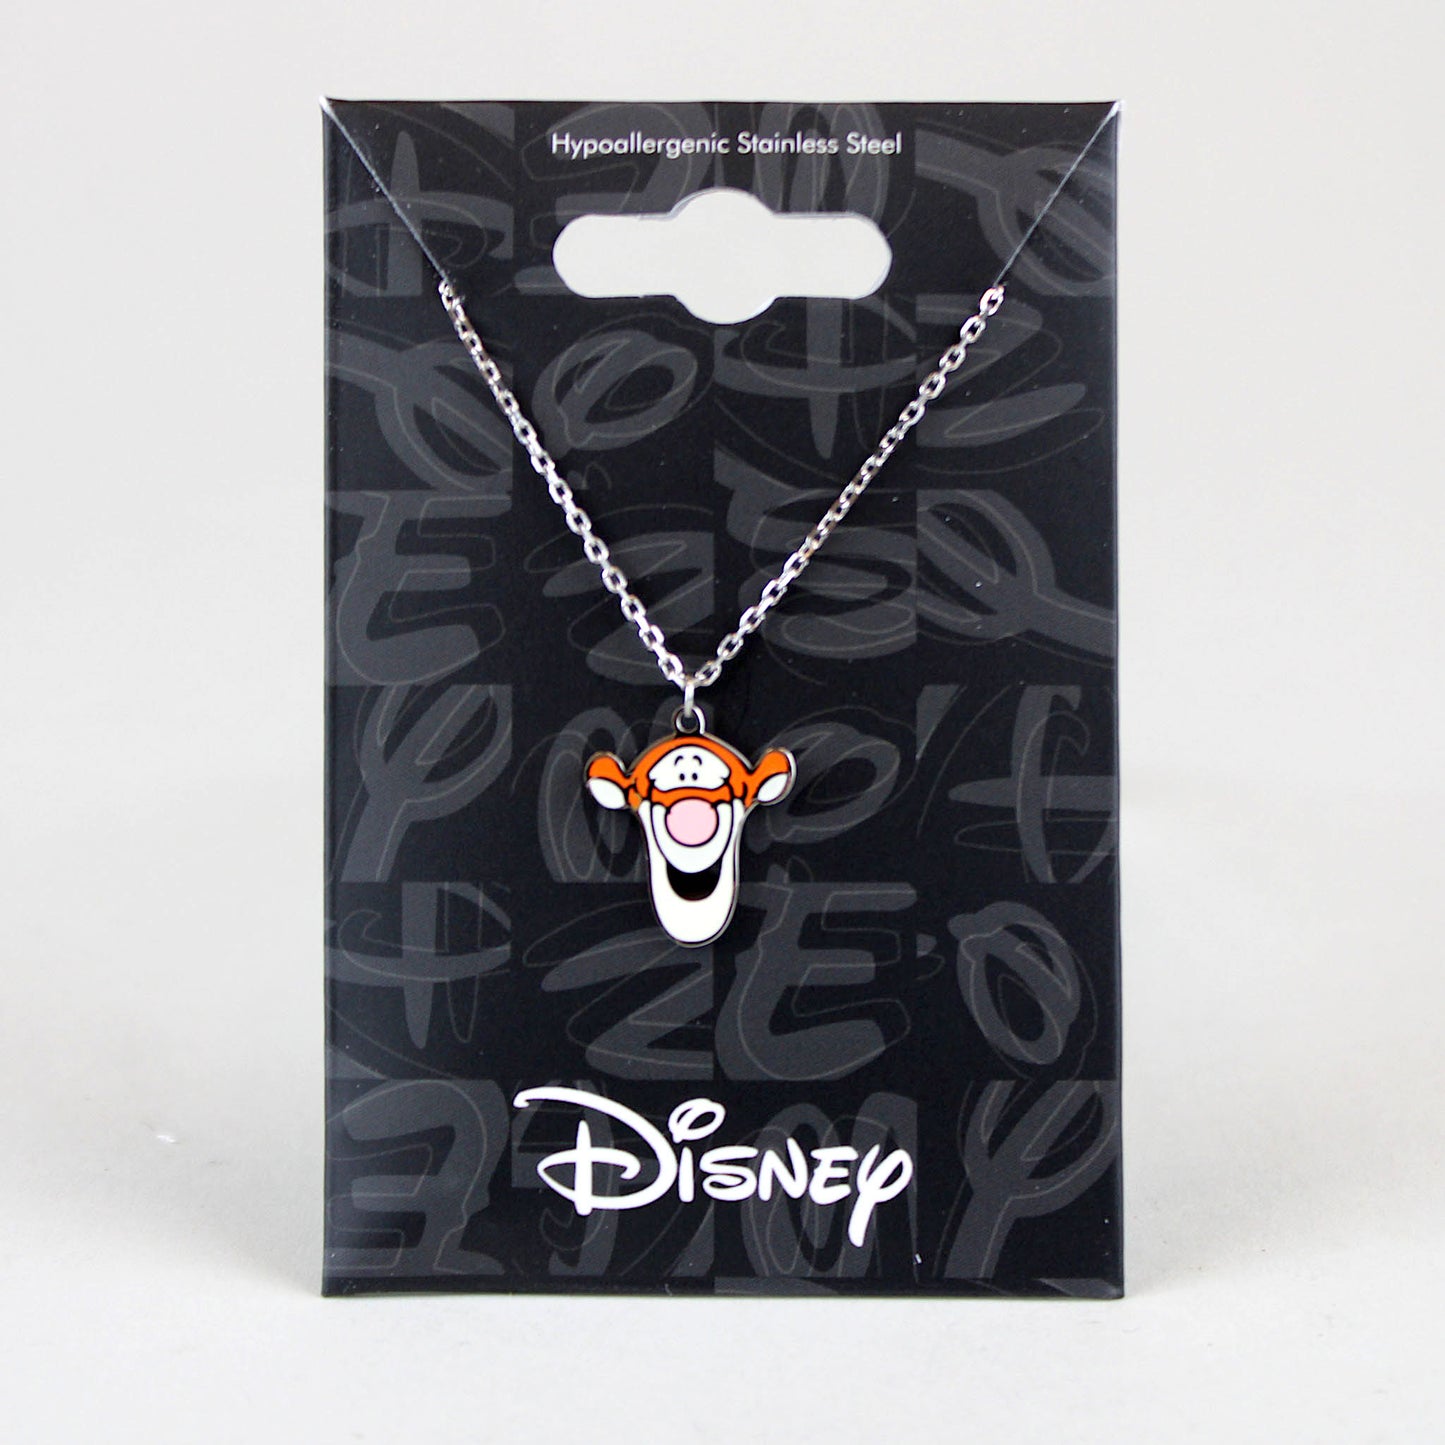 Load image into Gallery viewer, Tigger (Winnie the Pooh) Disney Enamel Necklace
